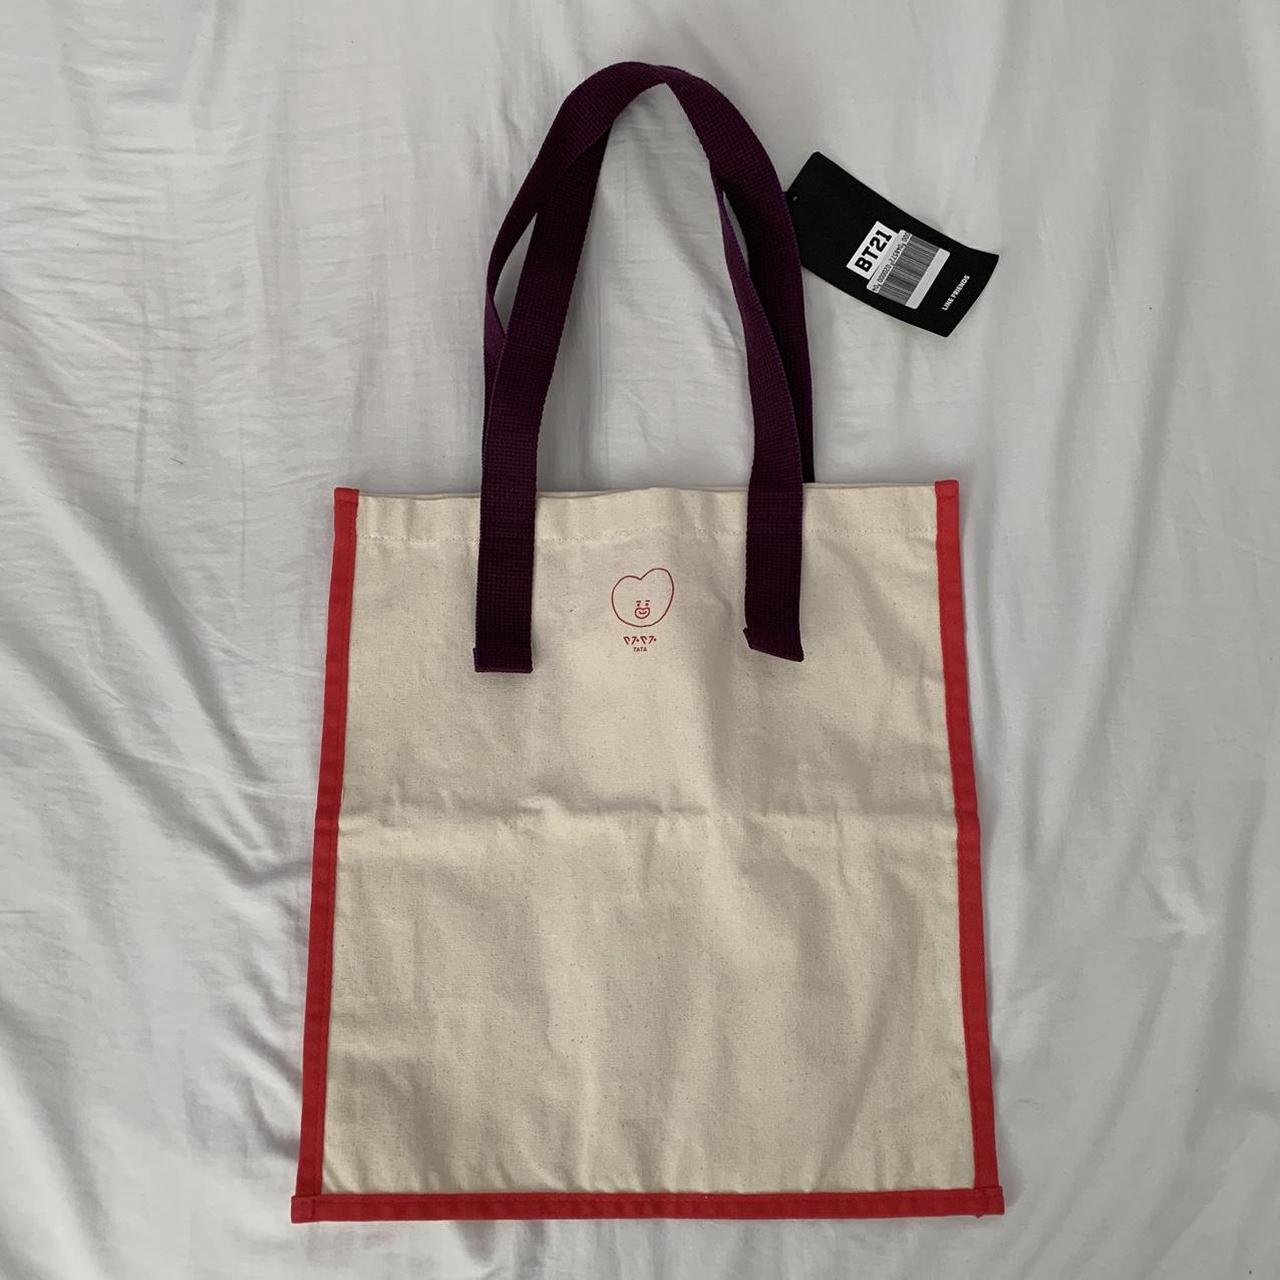 bt21 tata tote bag from the line store in korea... - Depop